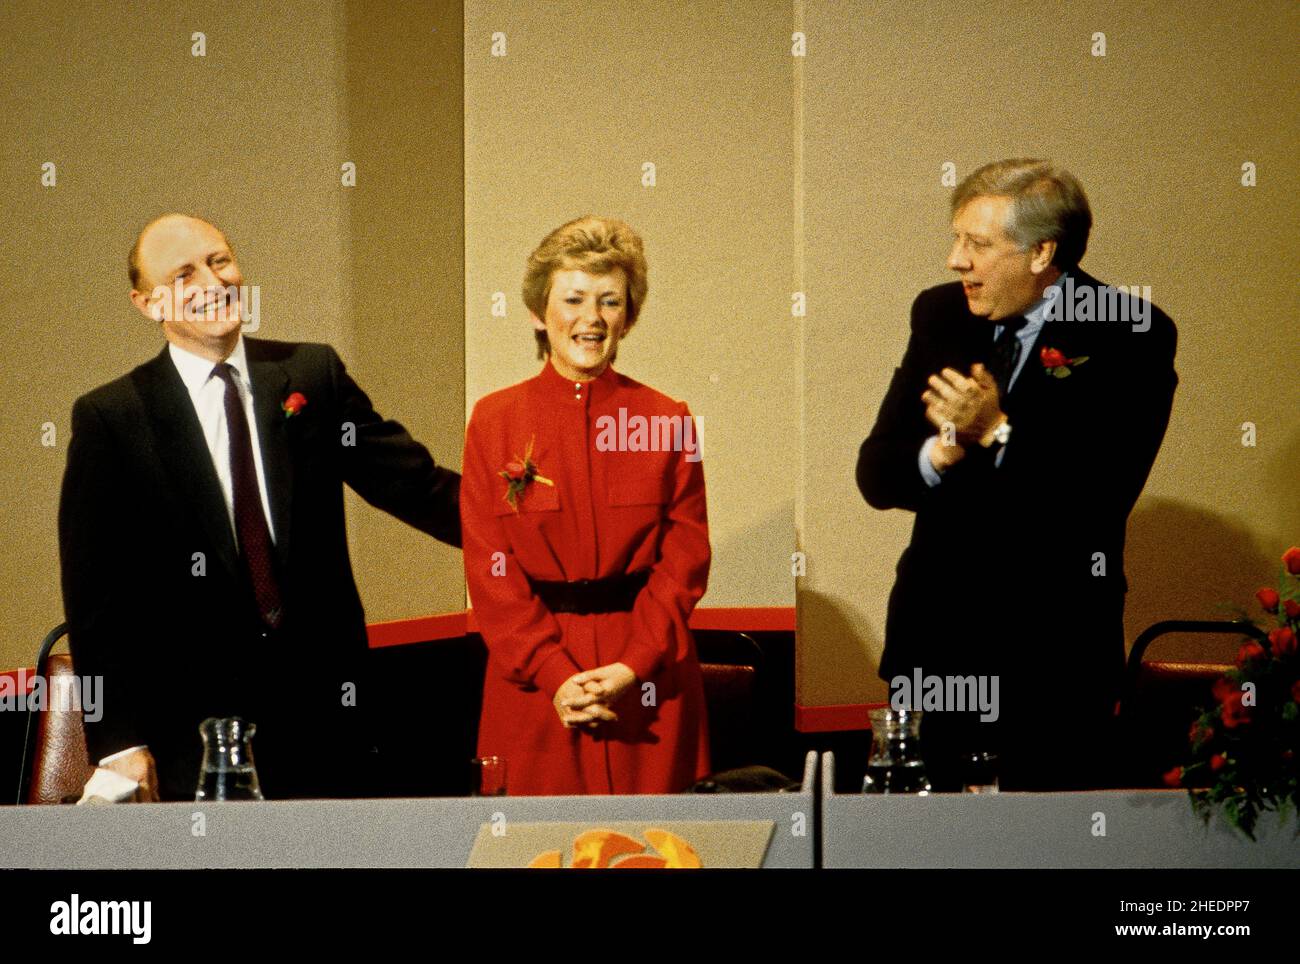 Labour party leader Neil Kinnock with his wife Glenys and Roy Hattersley at the Labour Party Conference Stock Photo